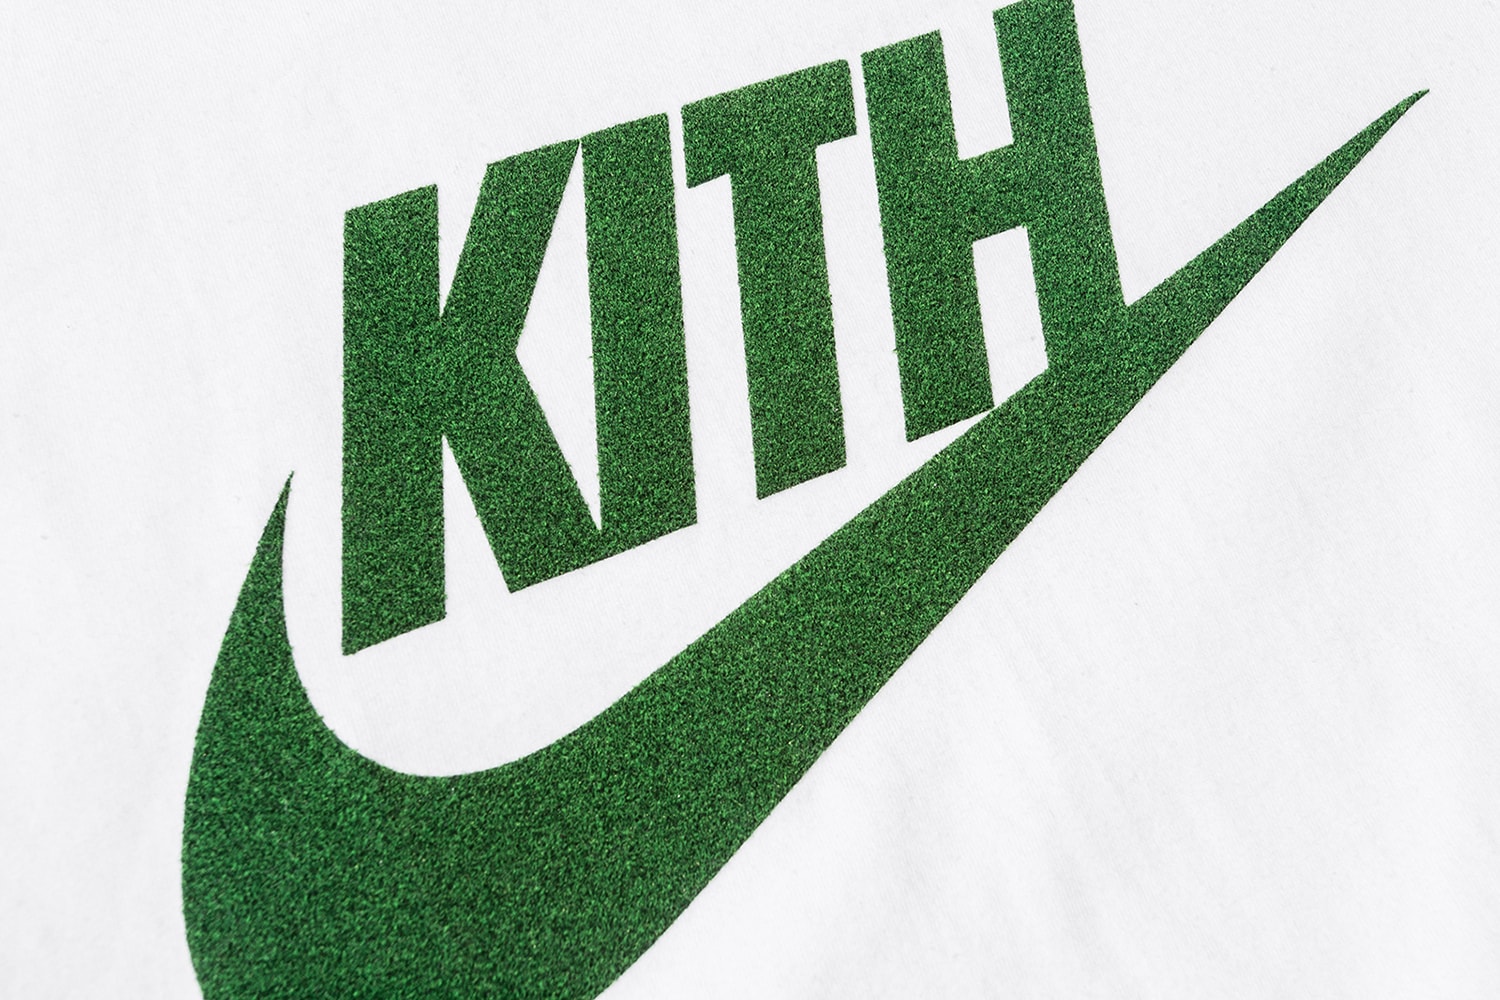 KITH x Nike Limited Edition Tennis-Inspired Shirts